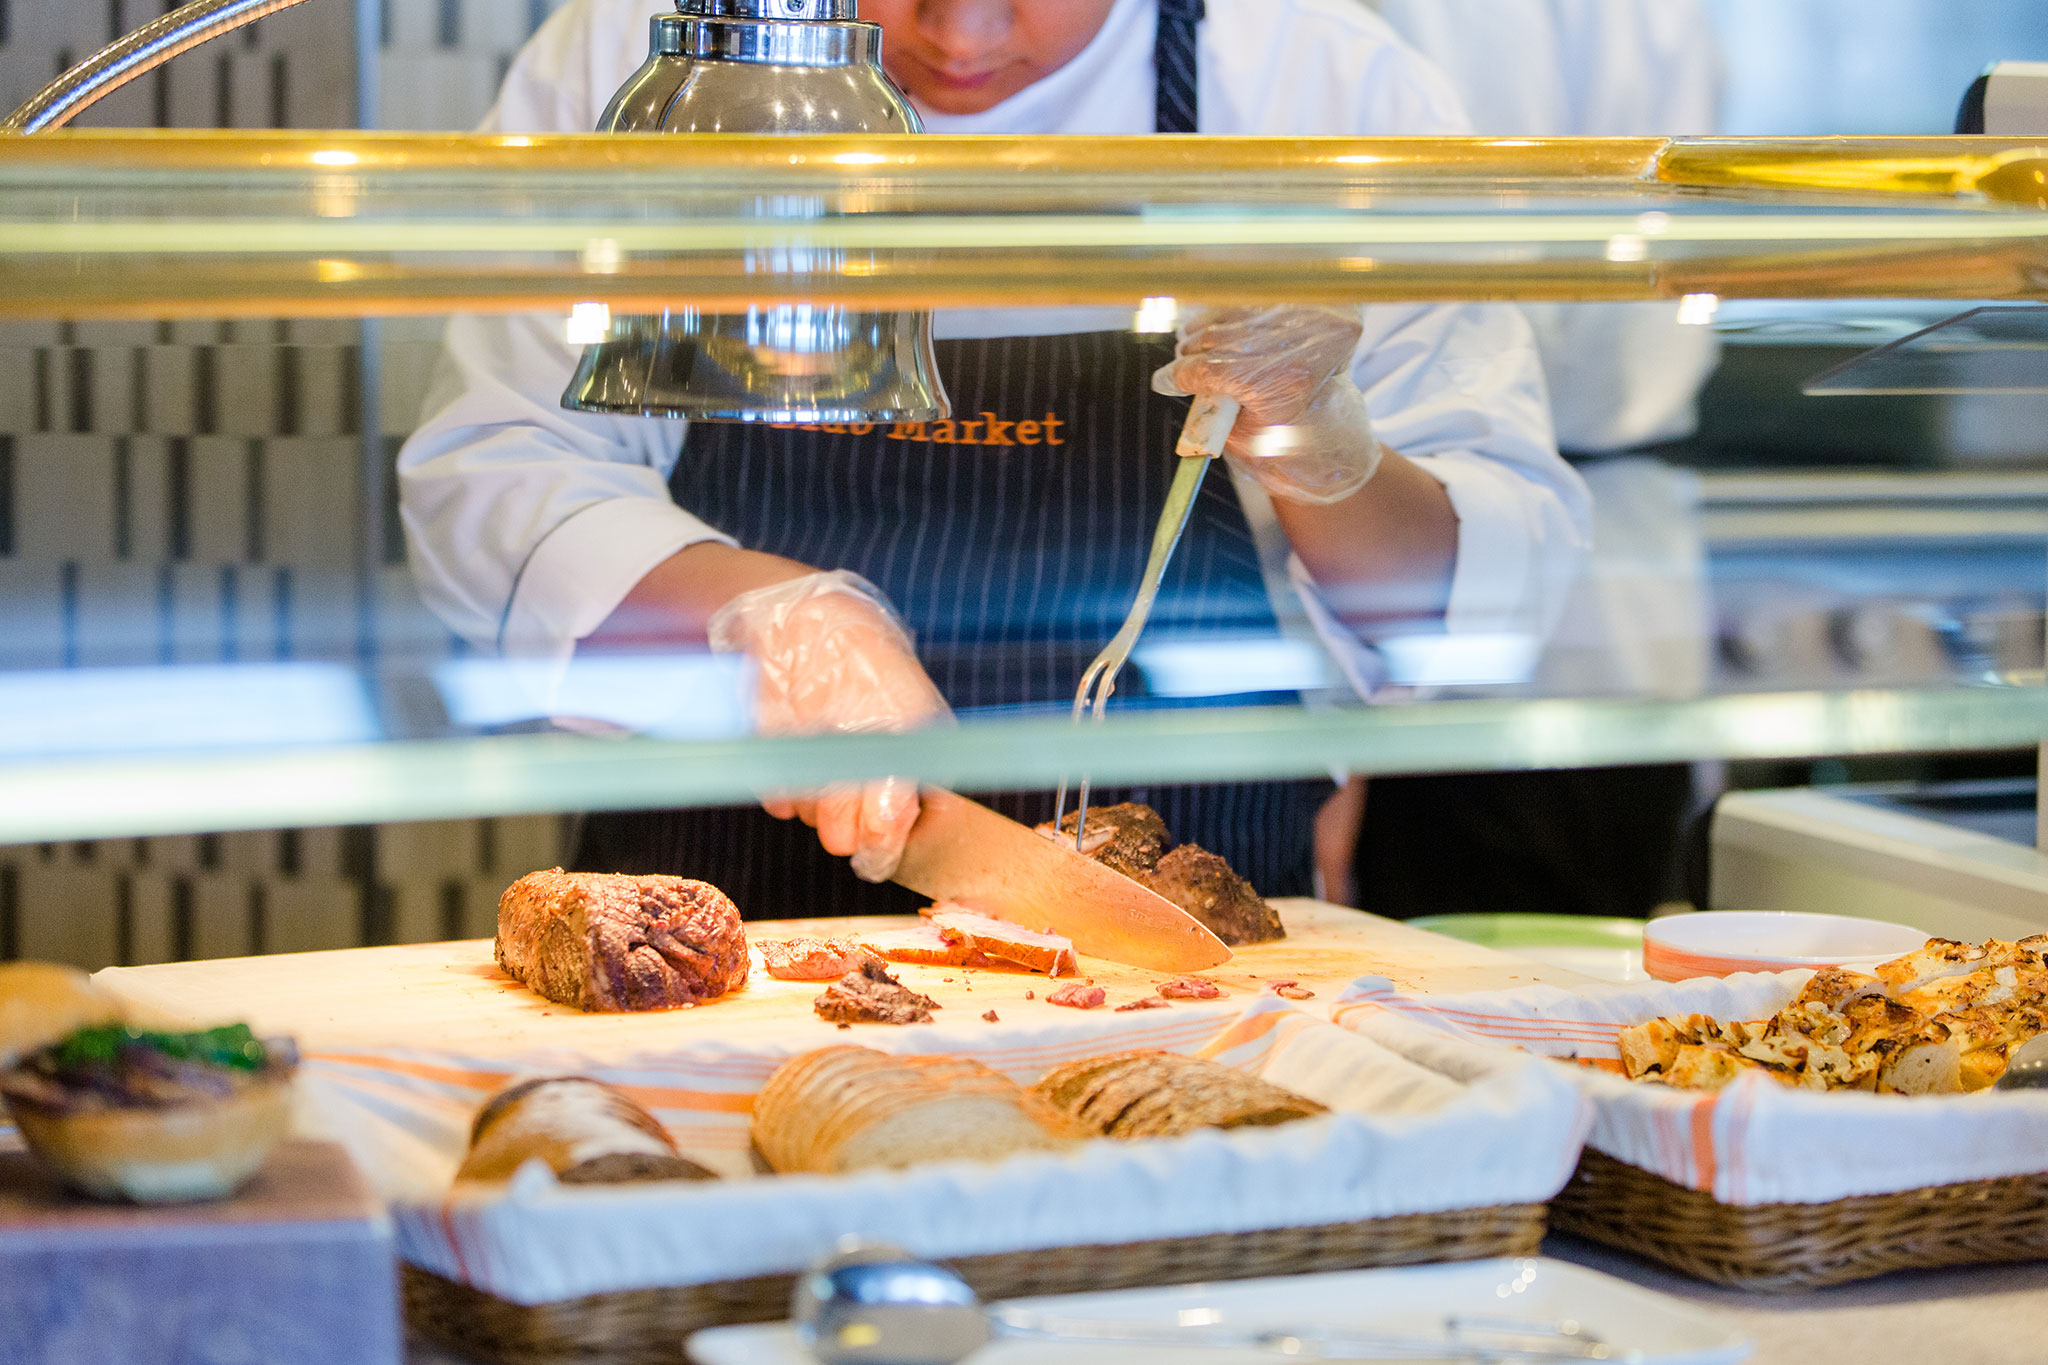 A chef in a striped apron slicing roasted meat at a buffet station, with assorted breads and dishes visible under a bright light.